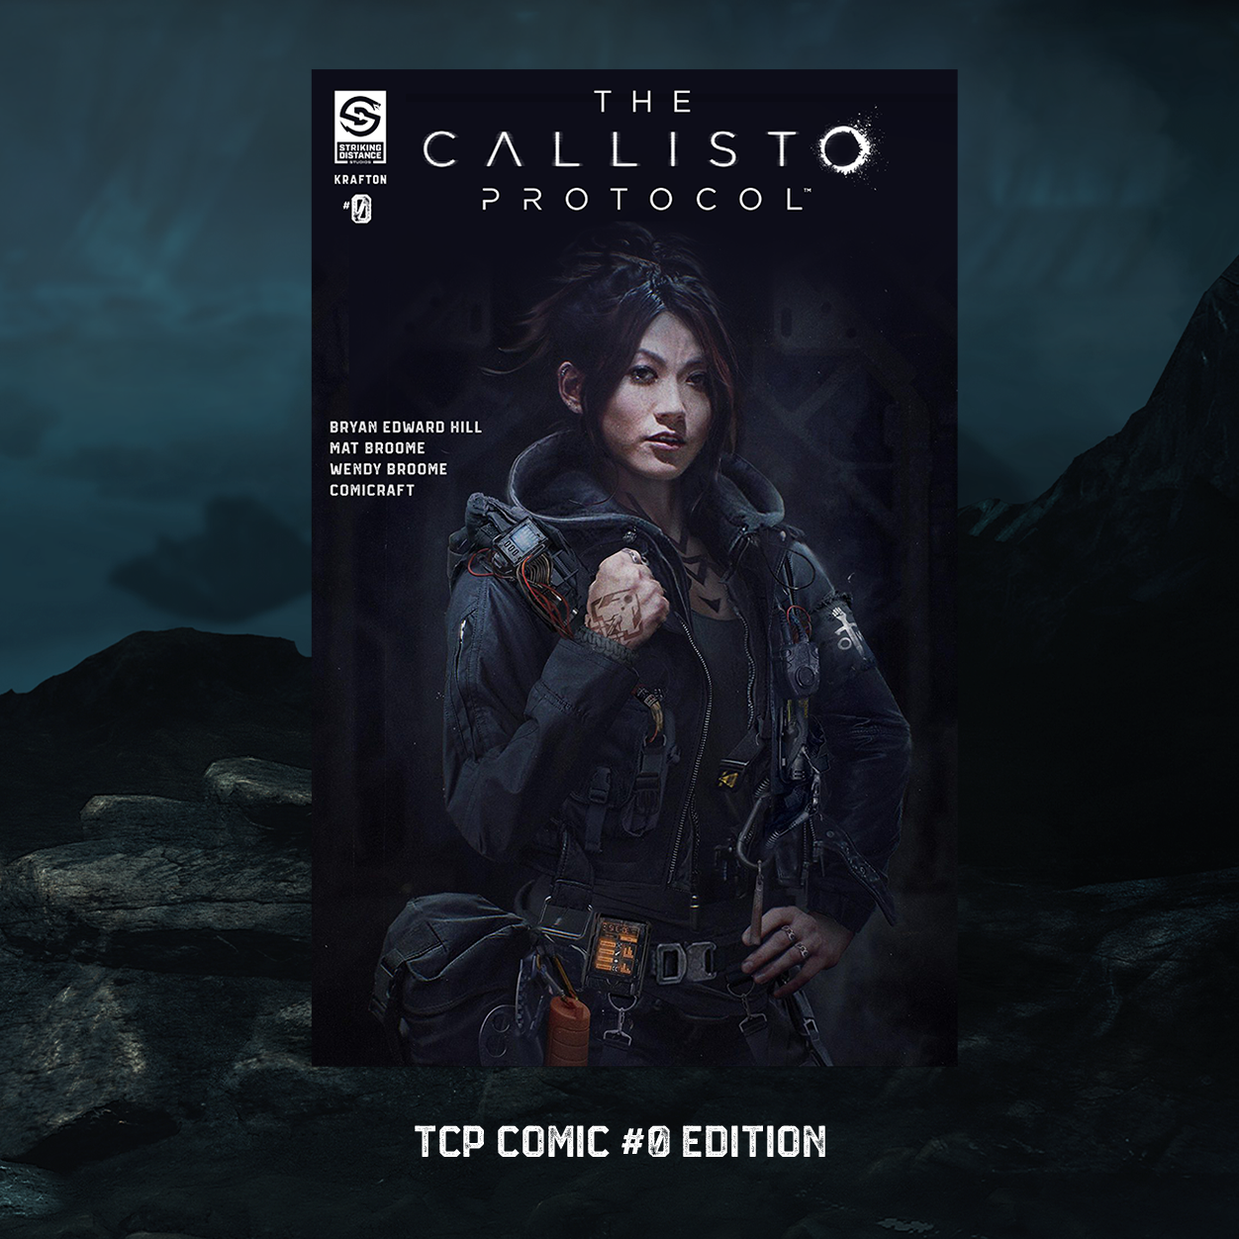 The Callisto Protocol Collector's Edition Price and List of